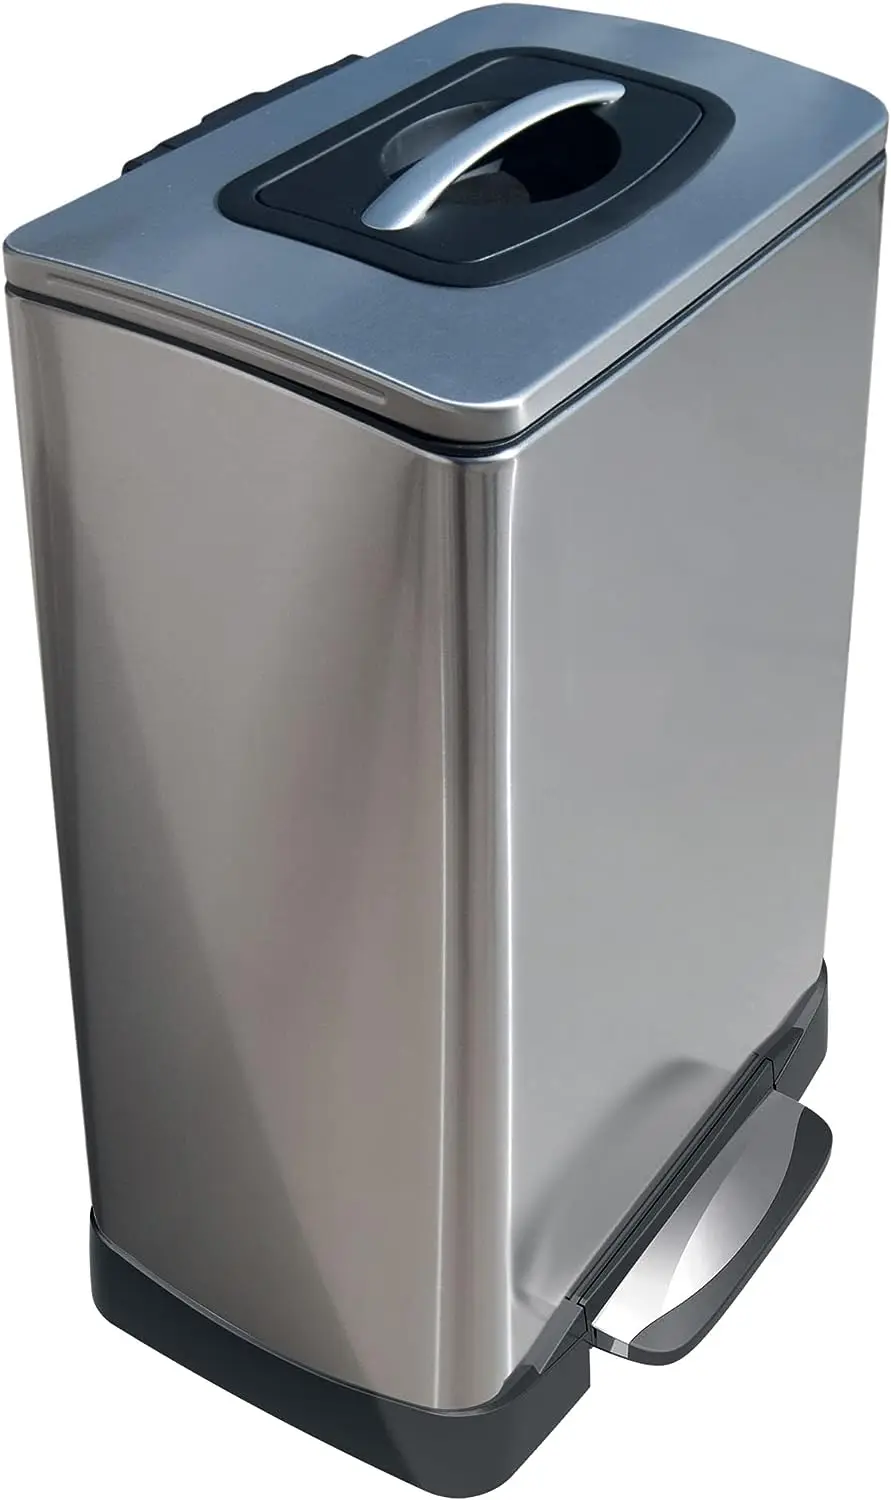 

Krusher Manual Trash Compactor, 40 L, Stainless Steel Automatic garbage bin Kitchen item Garbage bin for bathroom Automatic tras